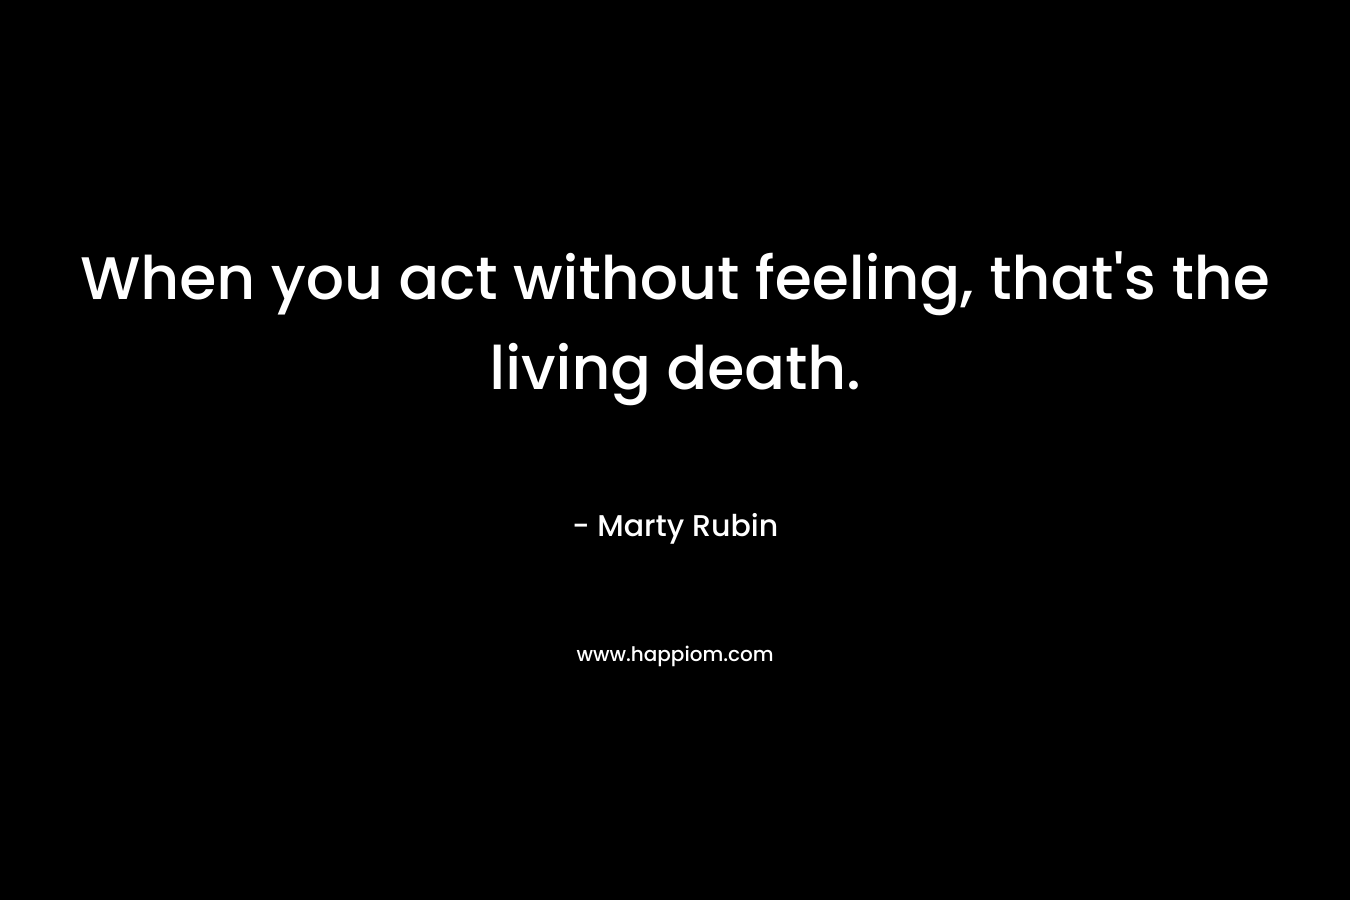 When you act without feeling, that's the living death.